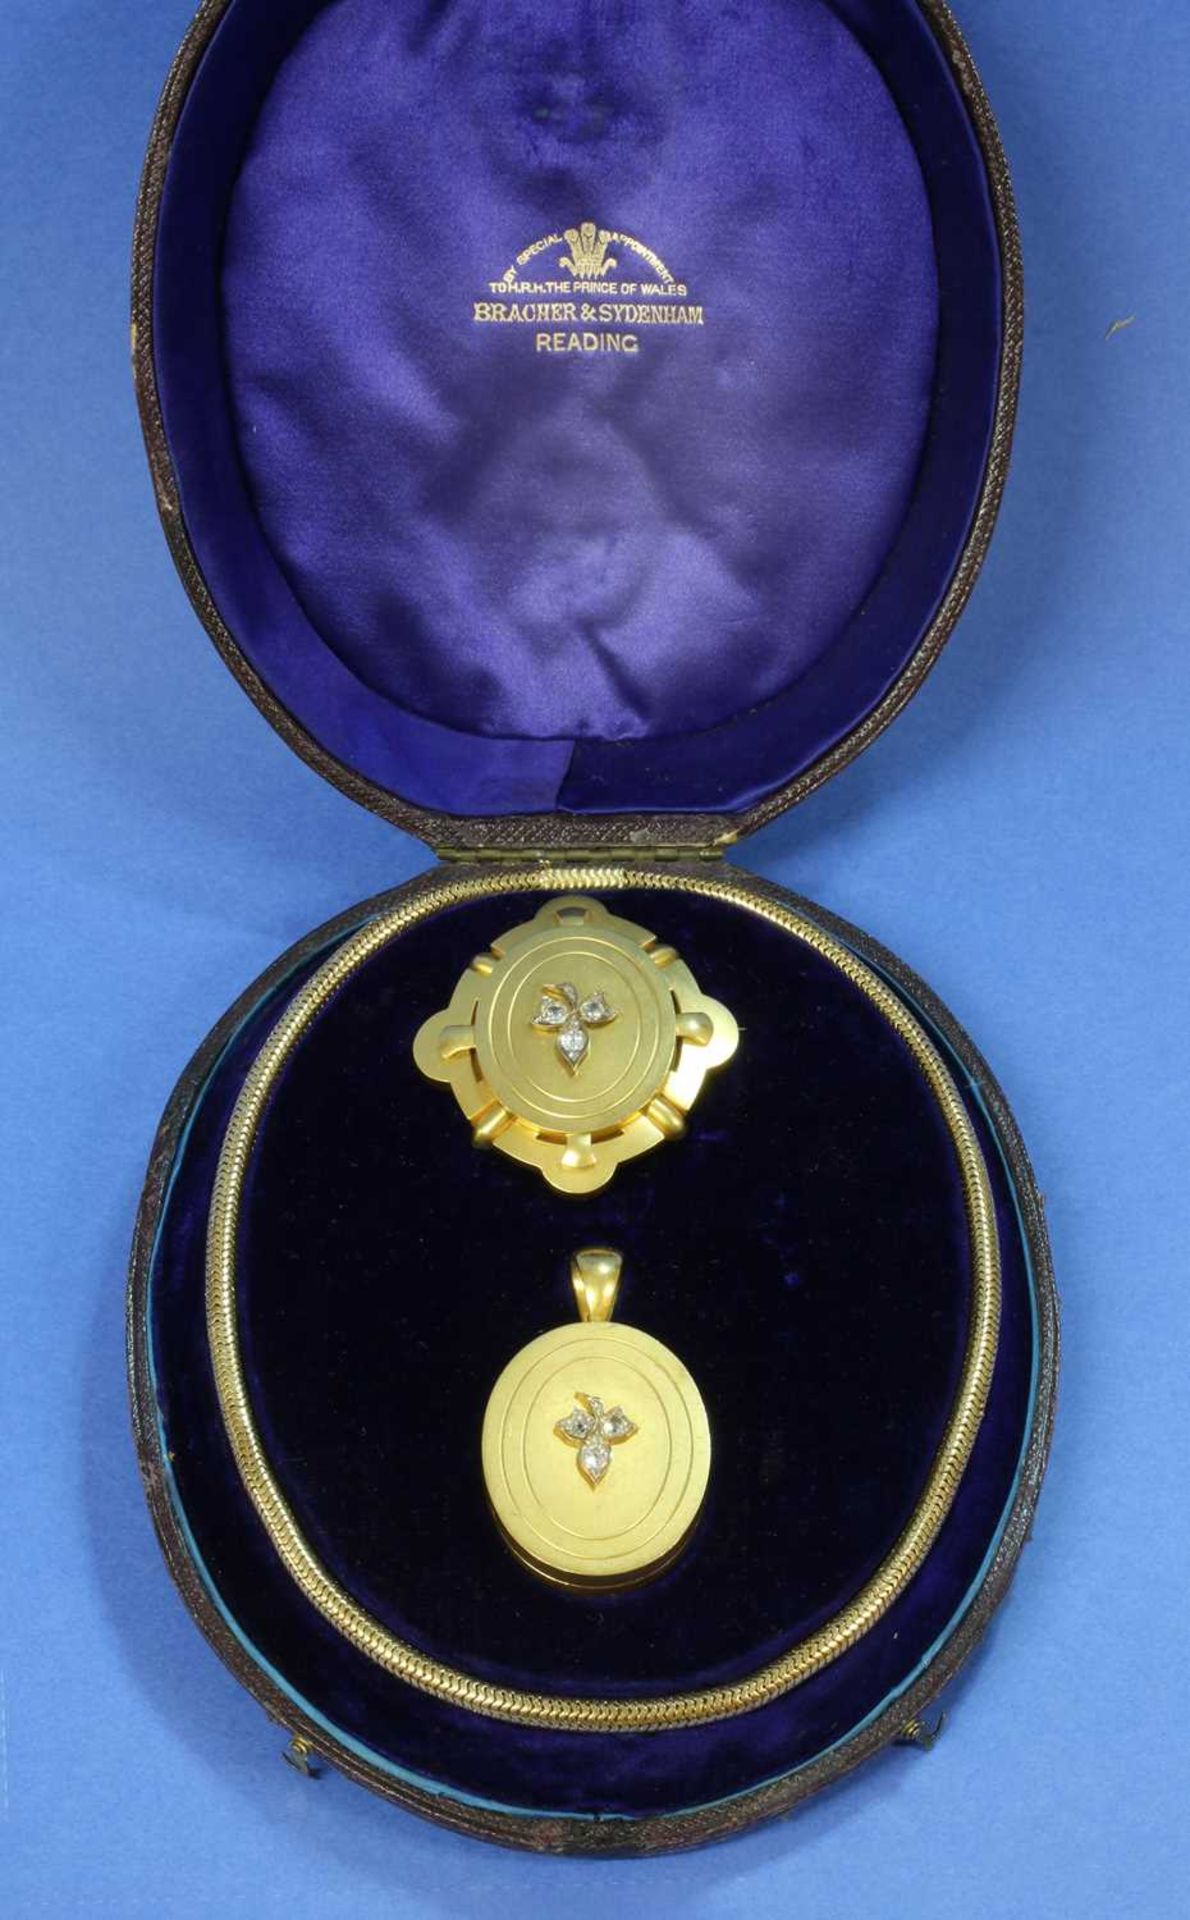 A cased Victorian gold diamond set locket, chain and brooch suite, by Bracher and Sydenham, Reading,